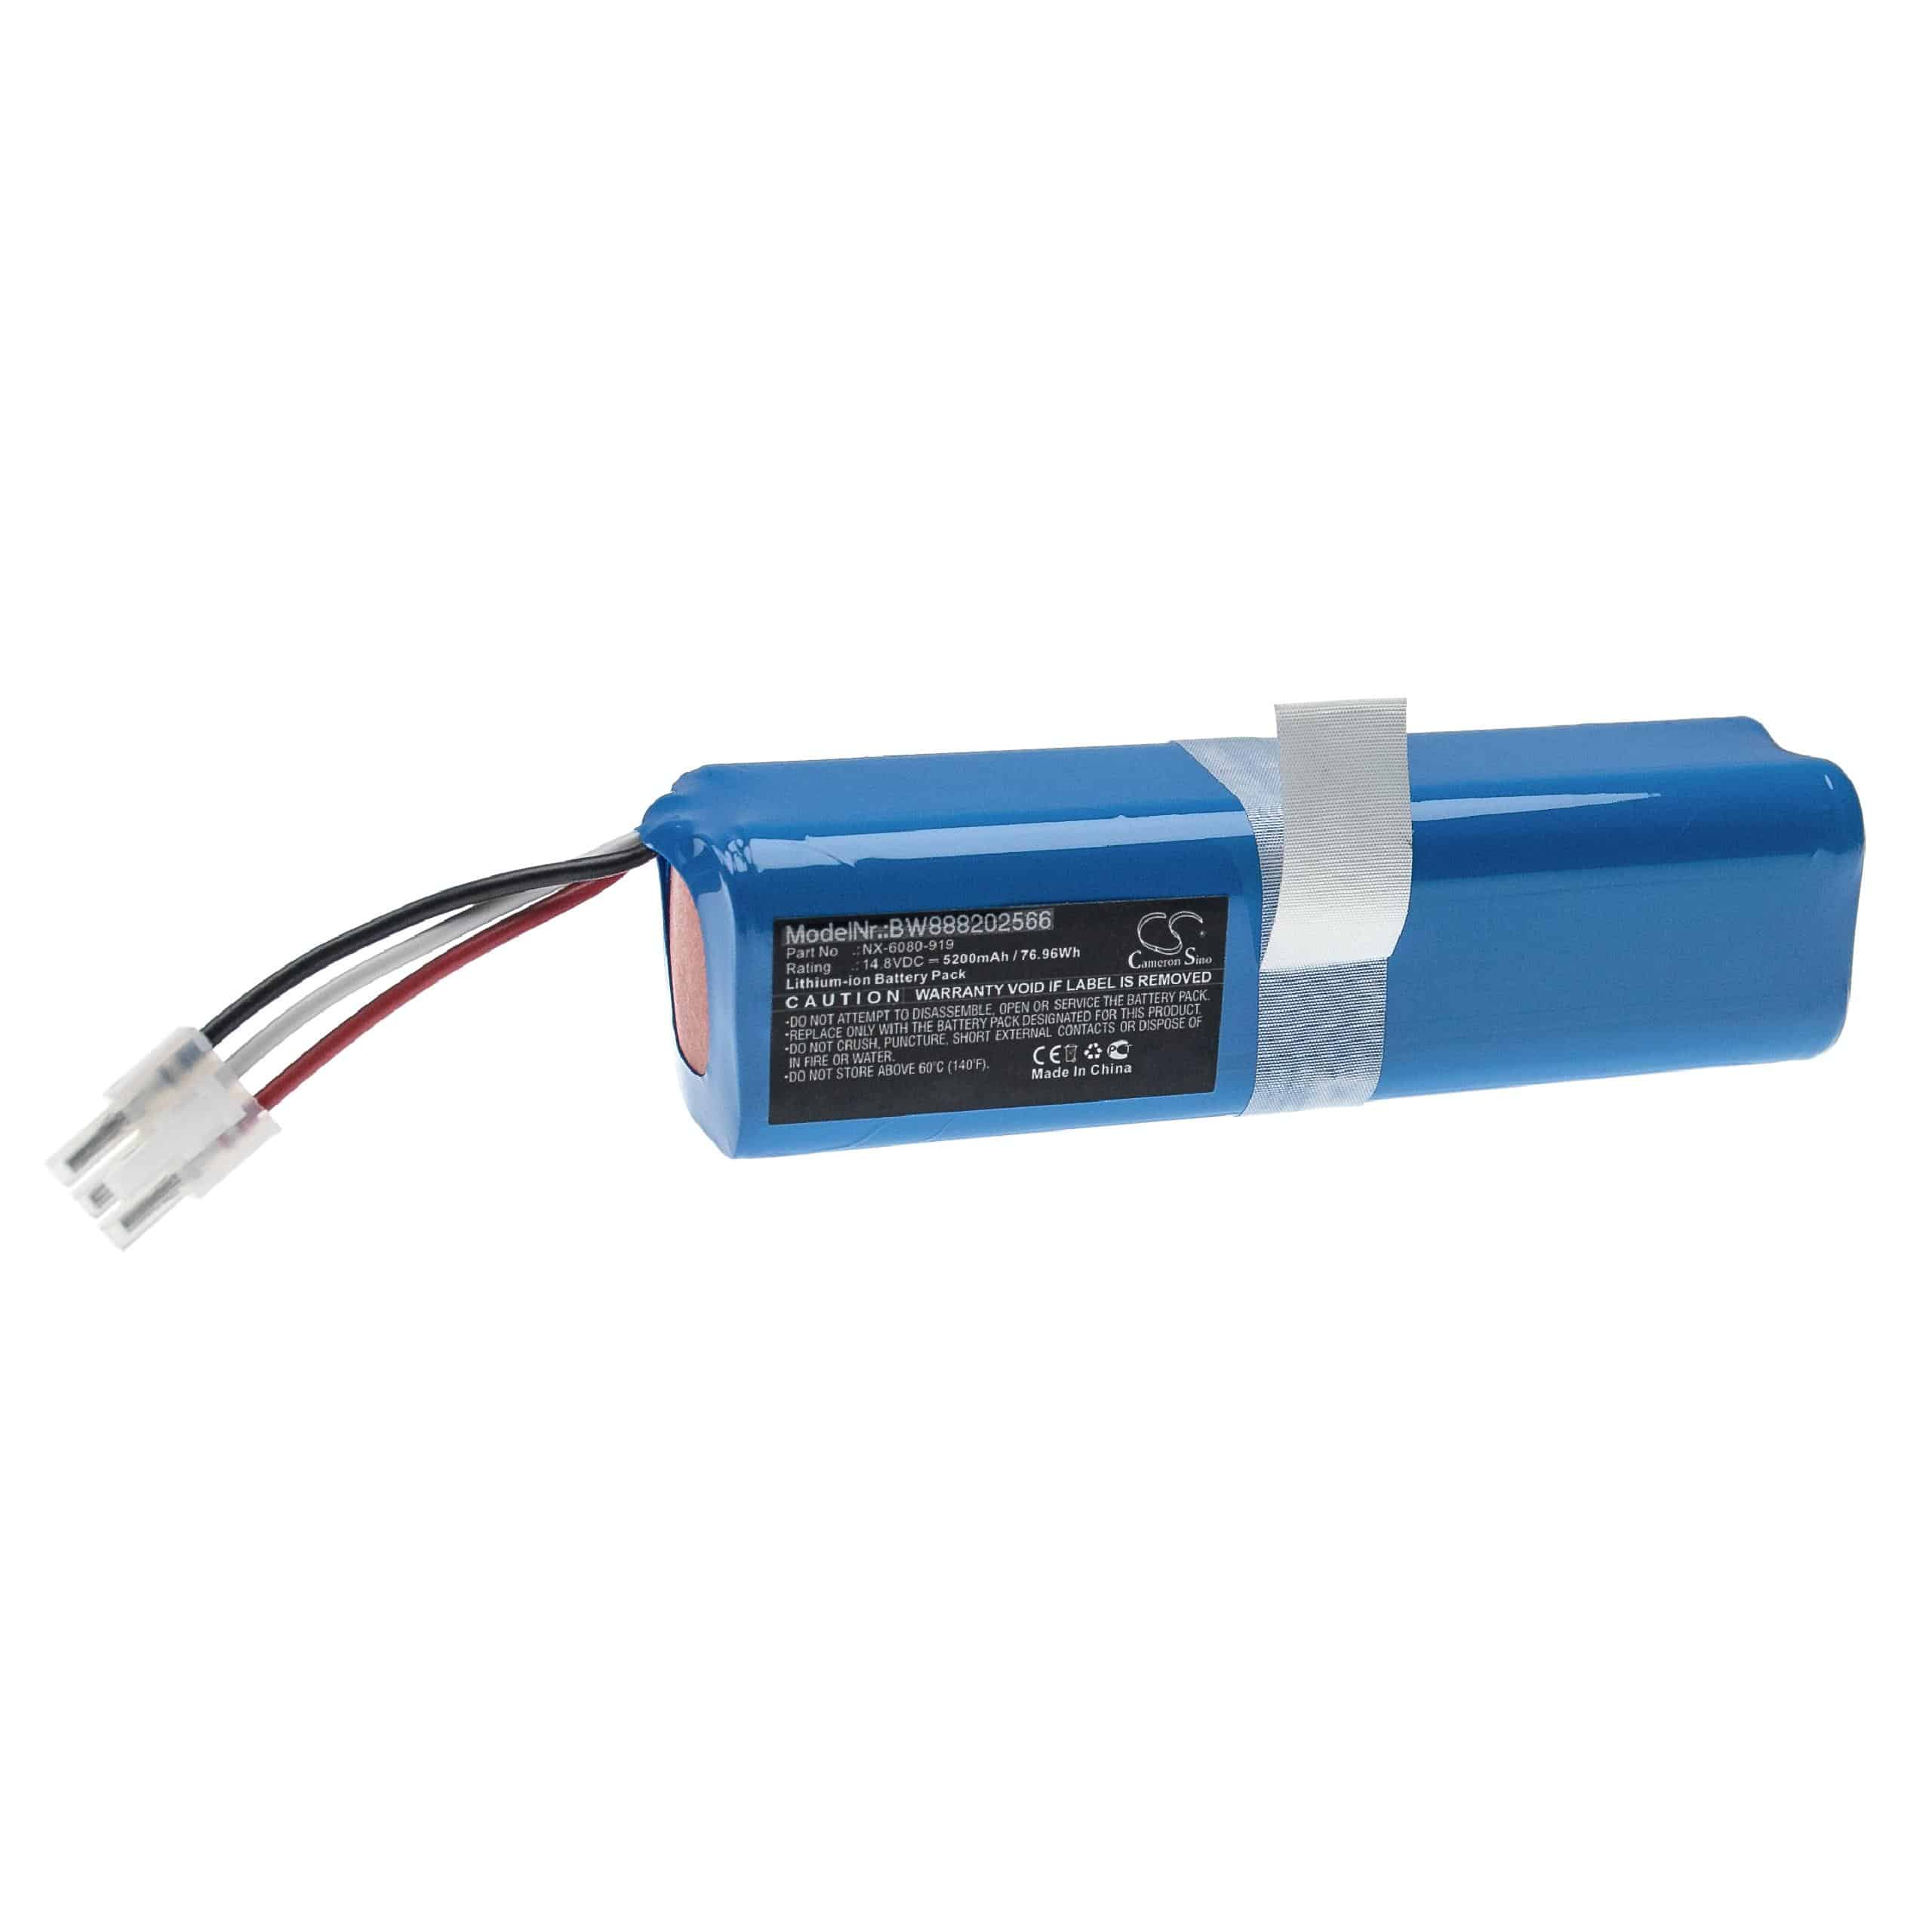 Battery Replacement for Sichler NX-6080-919 for - 5200mAh, 14.8V, Li-Ion